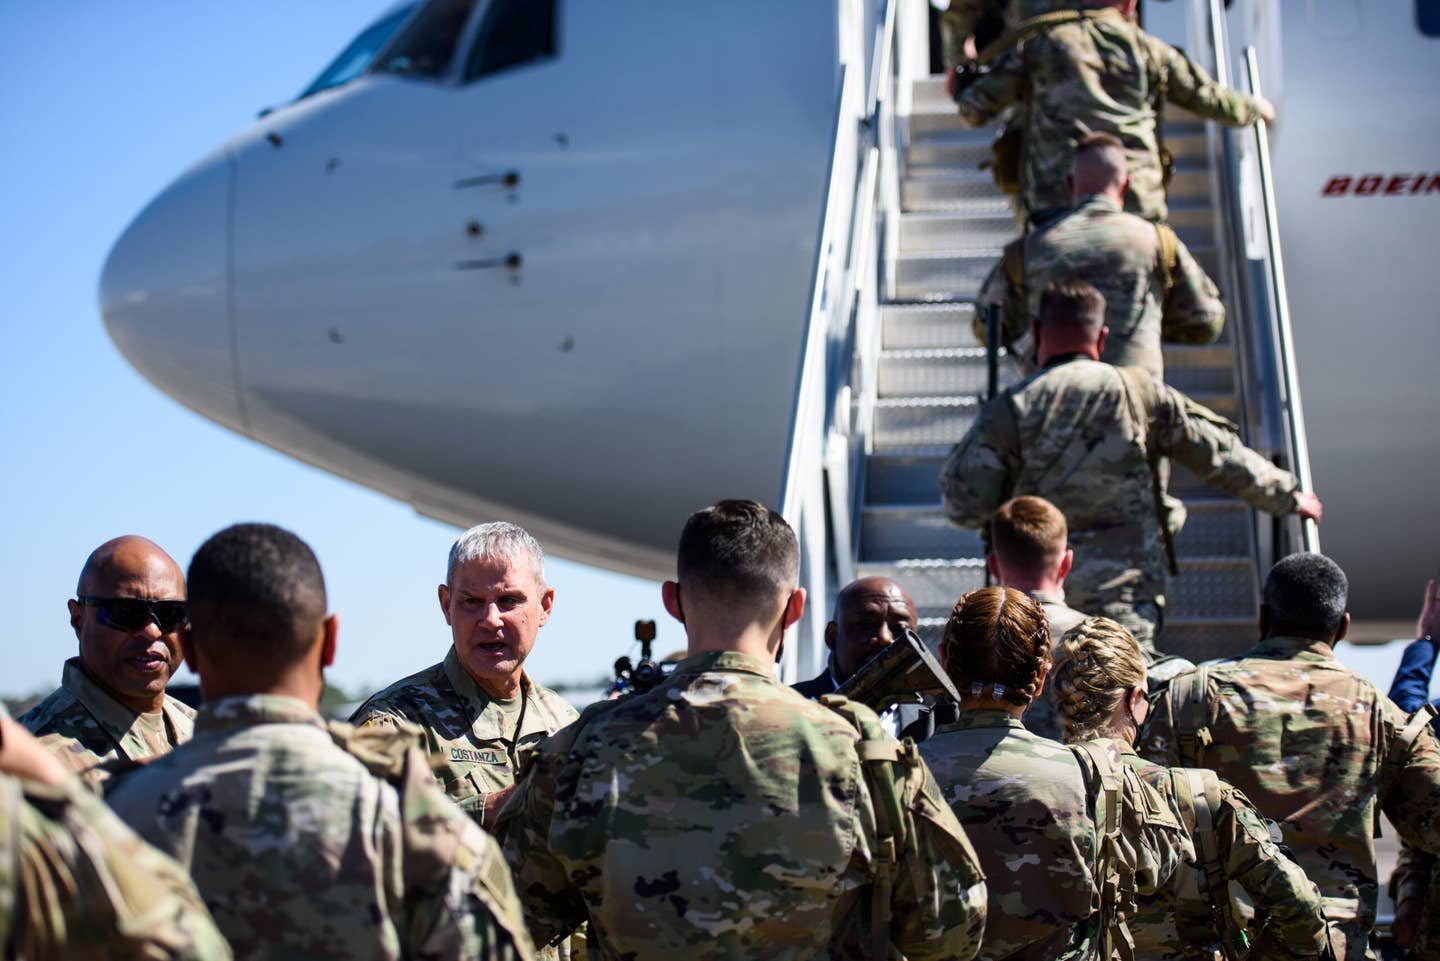 Maj. Gen. Chalres Costanza, greets members of the 1st Armored Brigade Combat Team, 3rd Battalion, 69th Armored Regiment deploy to Germany on March 2, 2022 in Savannah, Georgia. (Photo by Melissa Sue Gerrits/Getty Images)